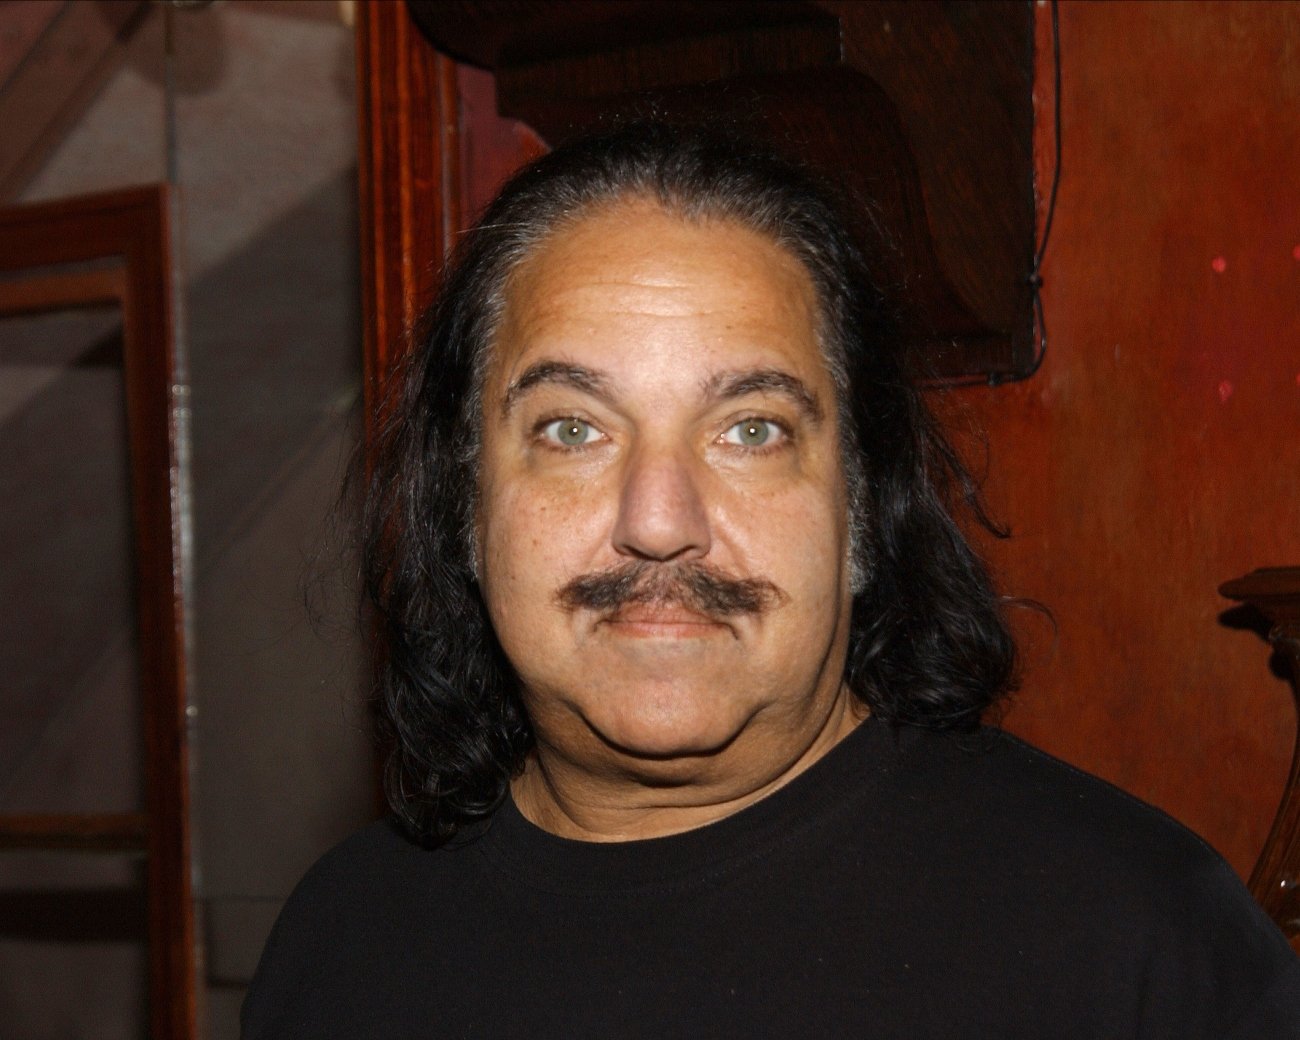 Ron Jeremy at the The Laugh Factory in Hollywood, California